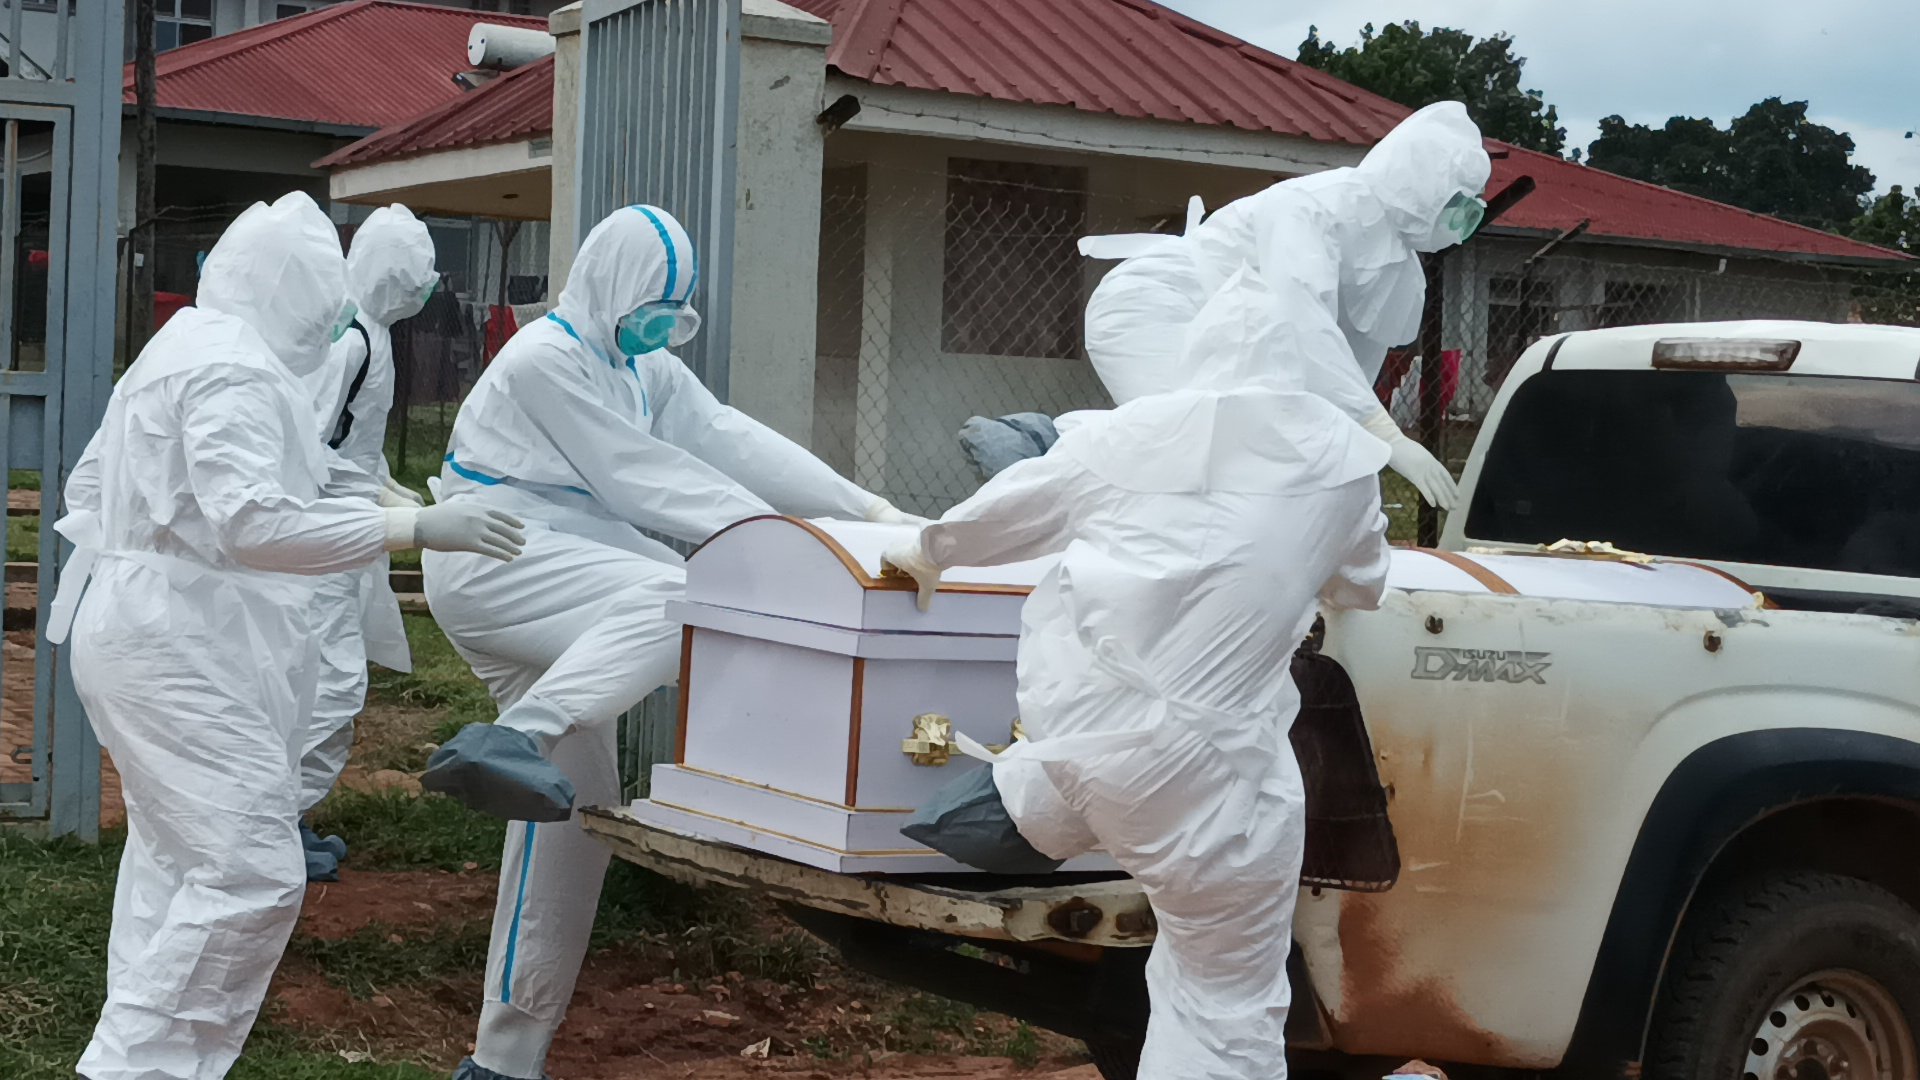 President Museveni lifts lockdown in Ebola epicenter Districts - Mubende and Kassanda